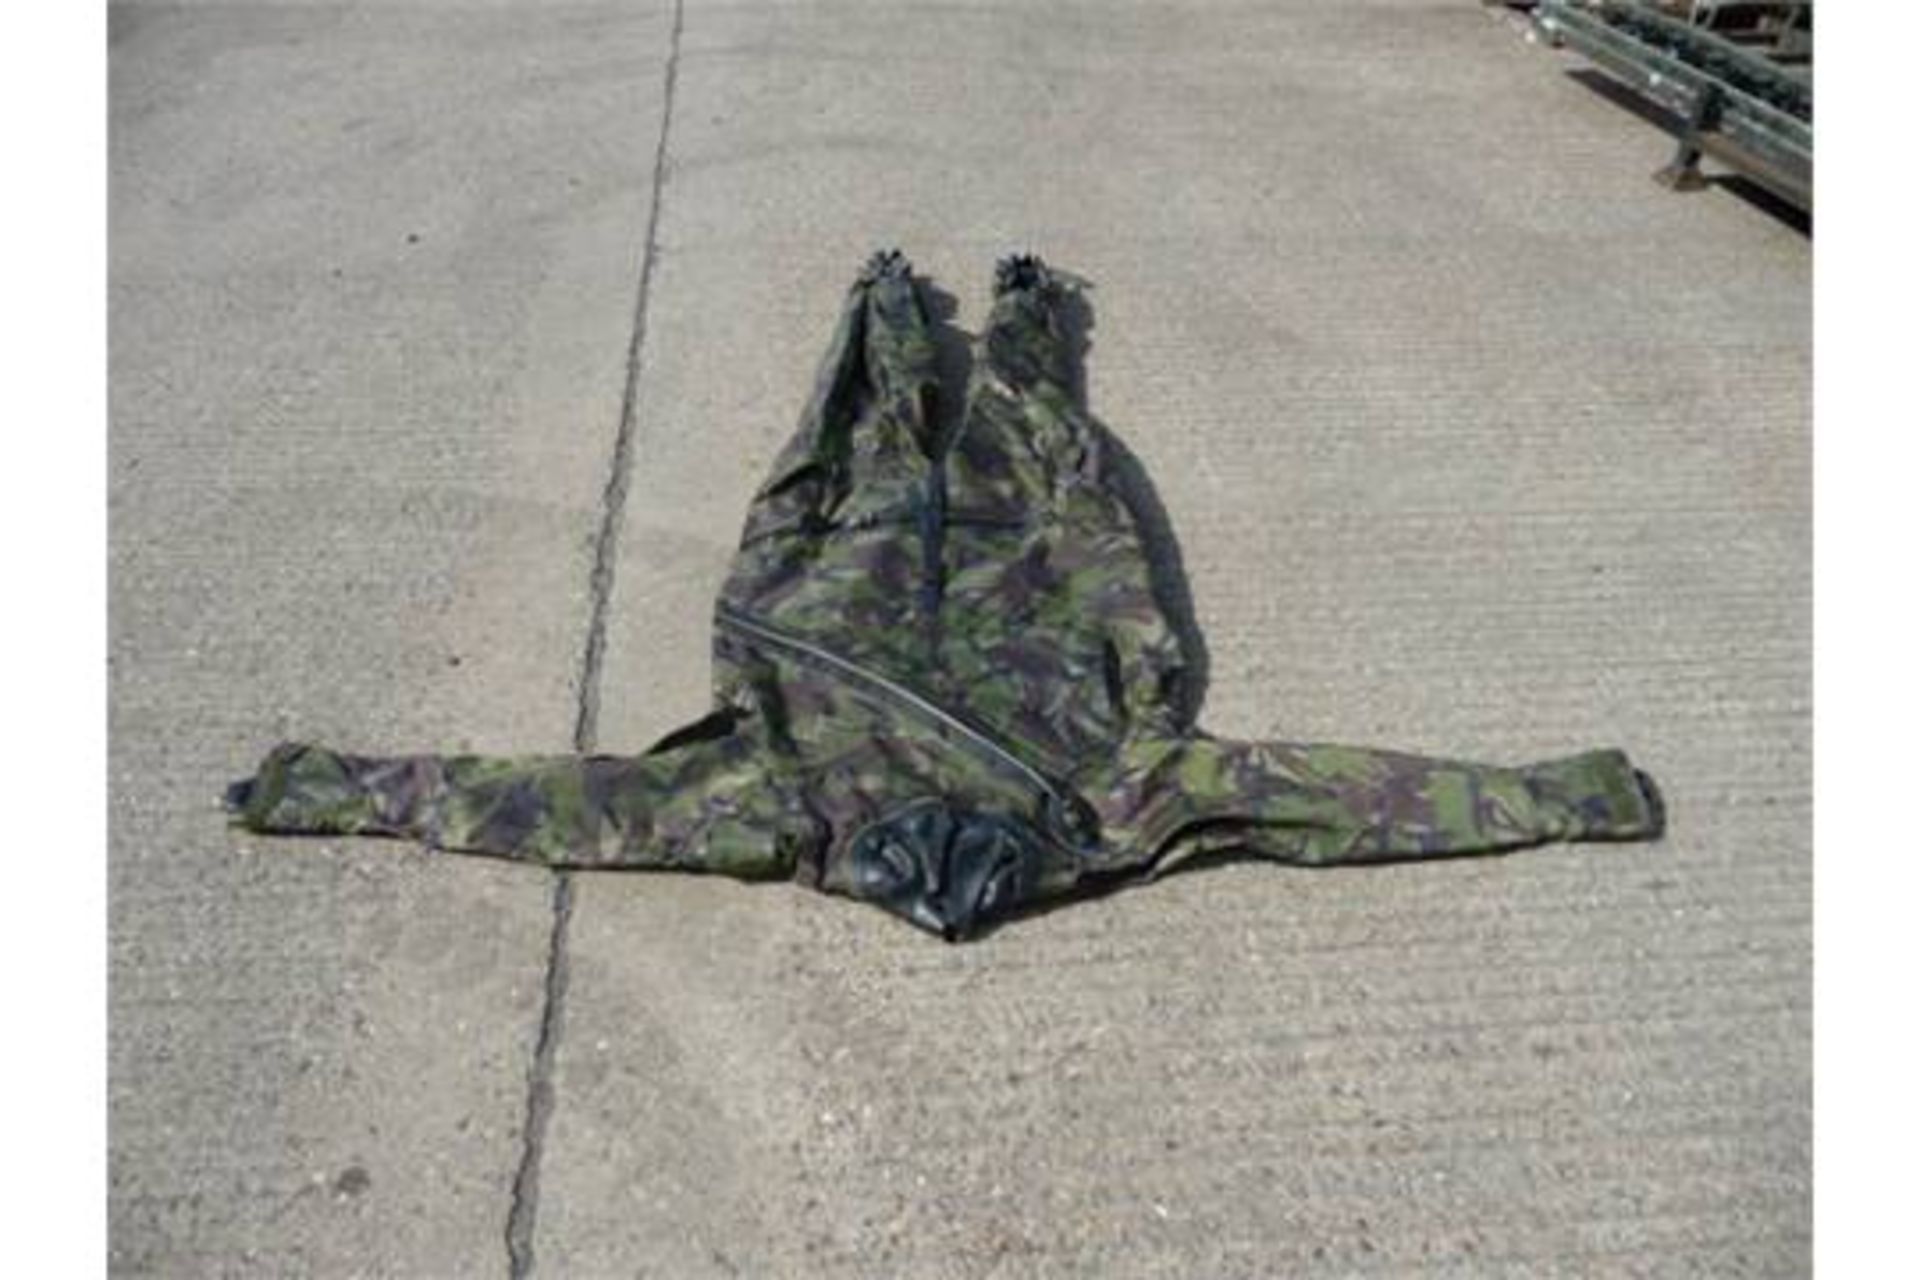 Royal Marines Immersion Suit - Image 3 of 6